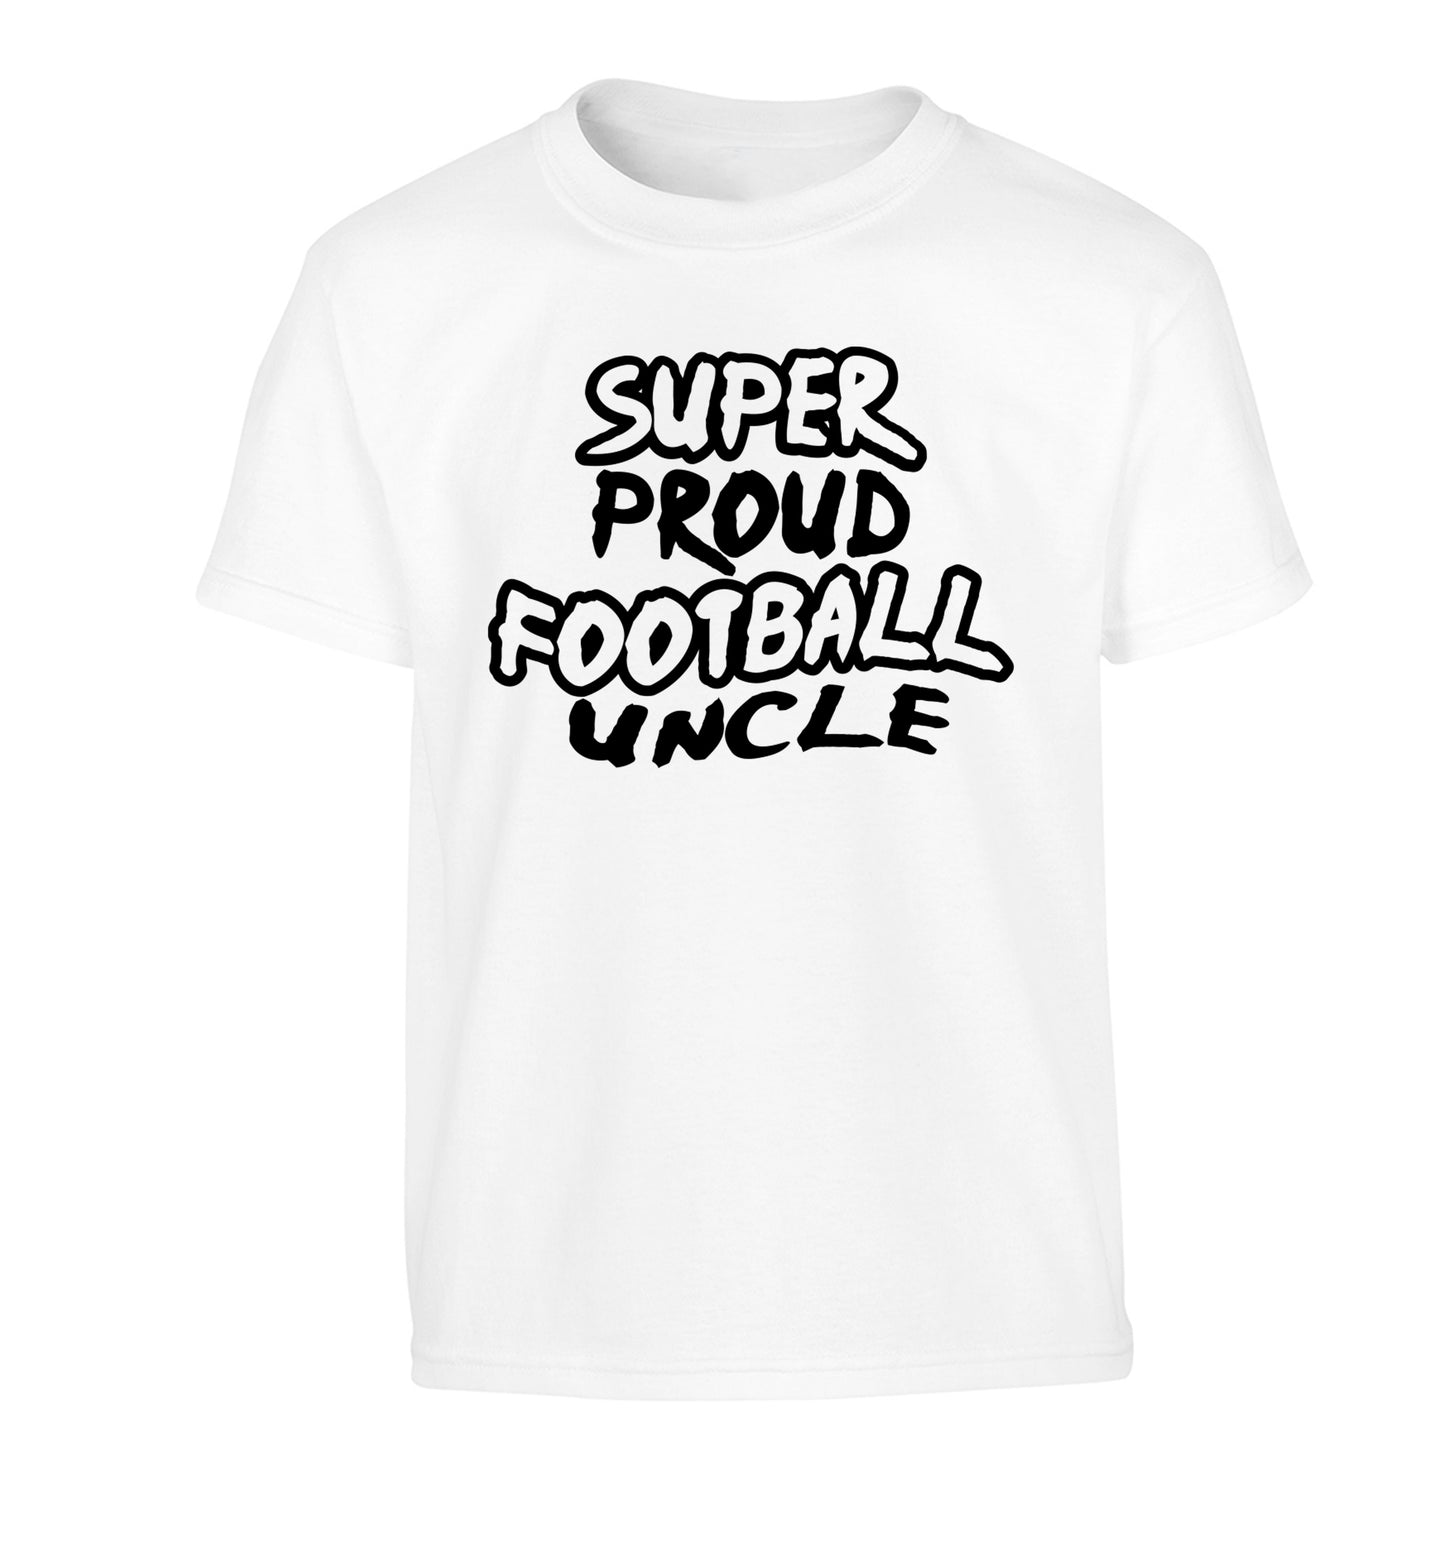 Super proud football uncle Children's white Tshirt 12-14 Years